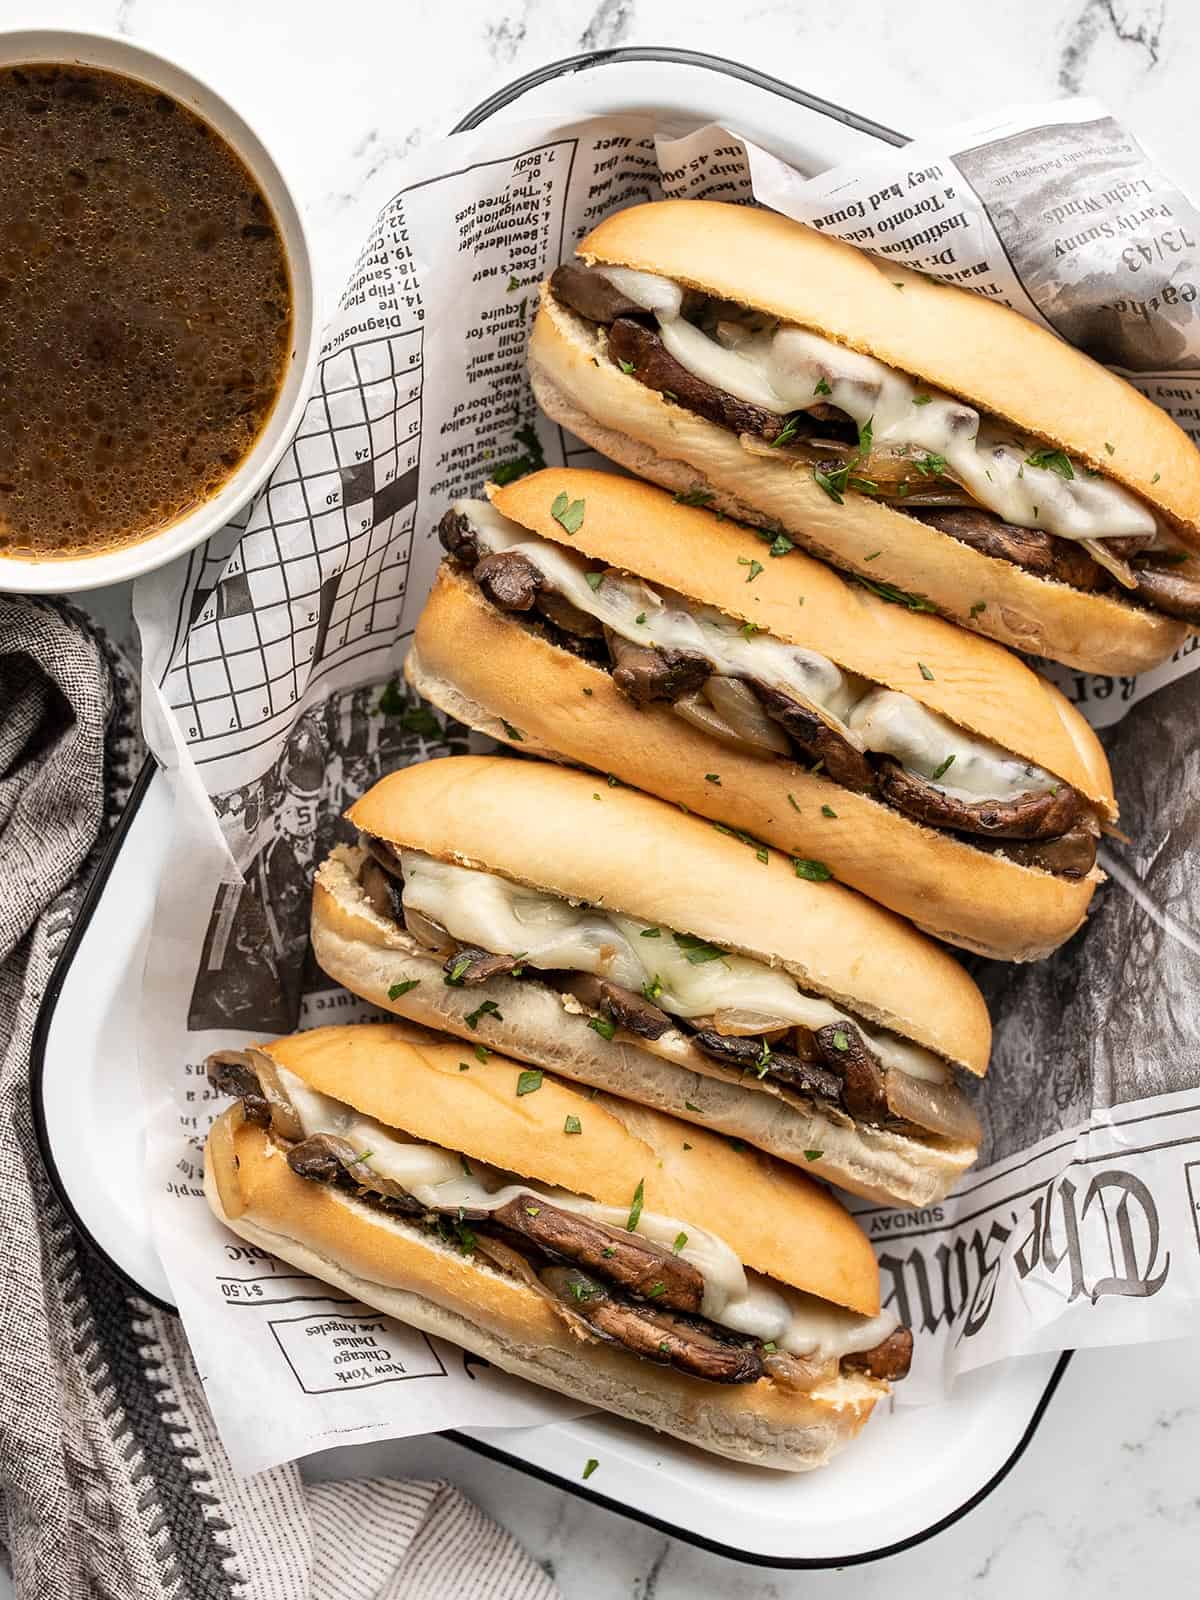 Overhead view of vegetarian French dip sandwiches in a tray.